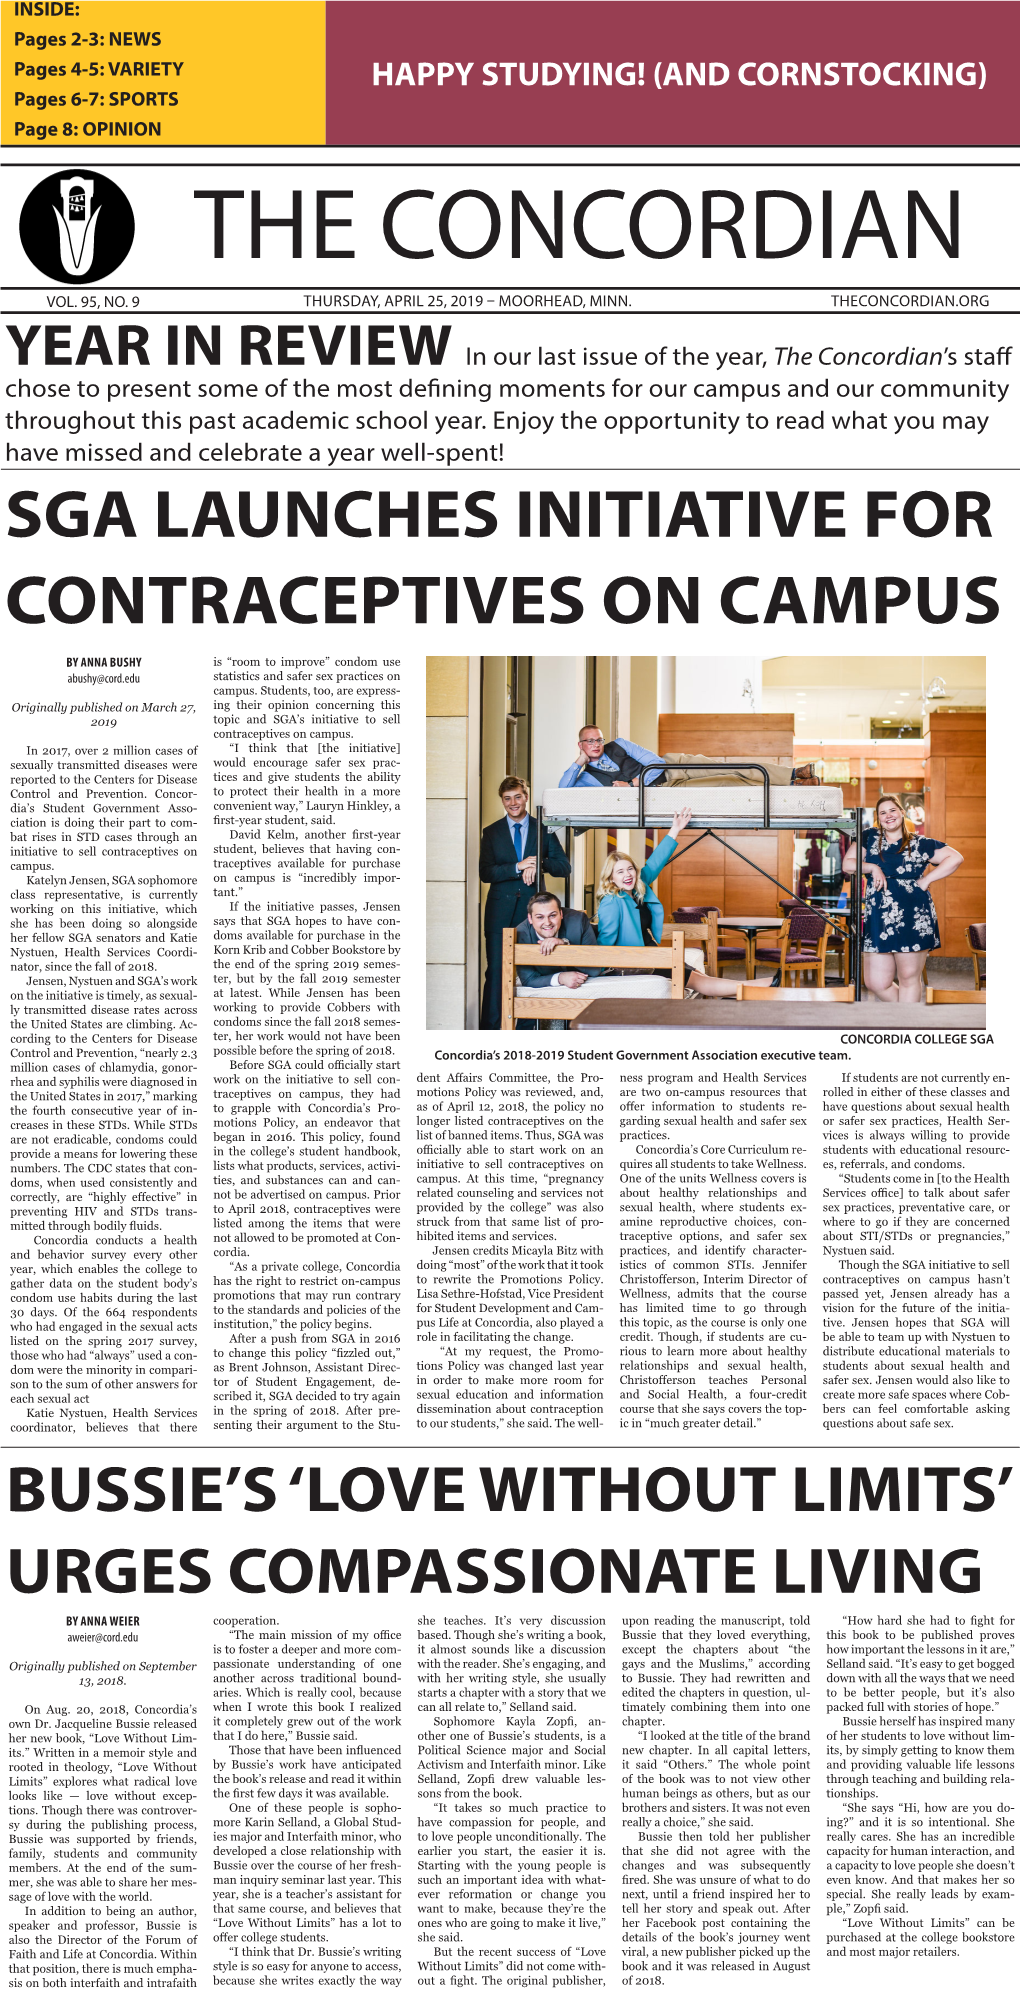 Contraceptives on Campus